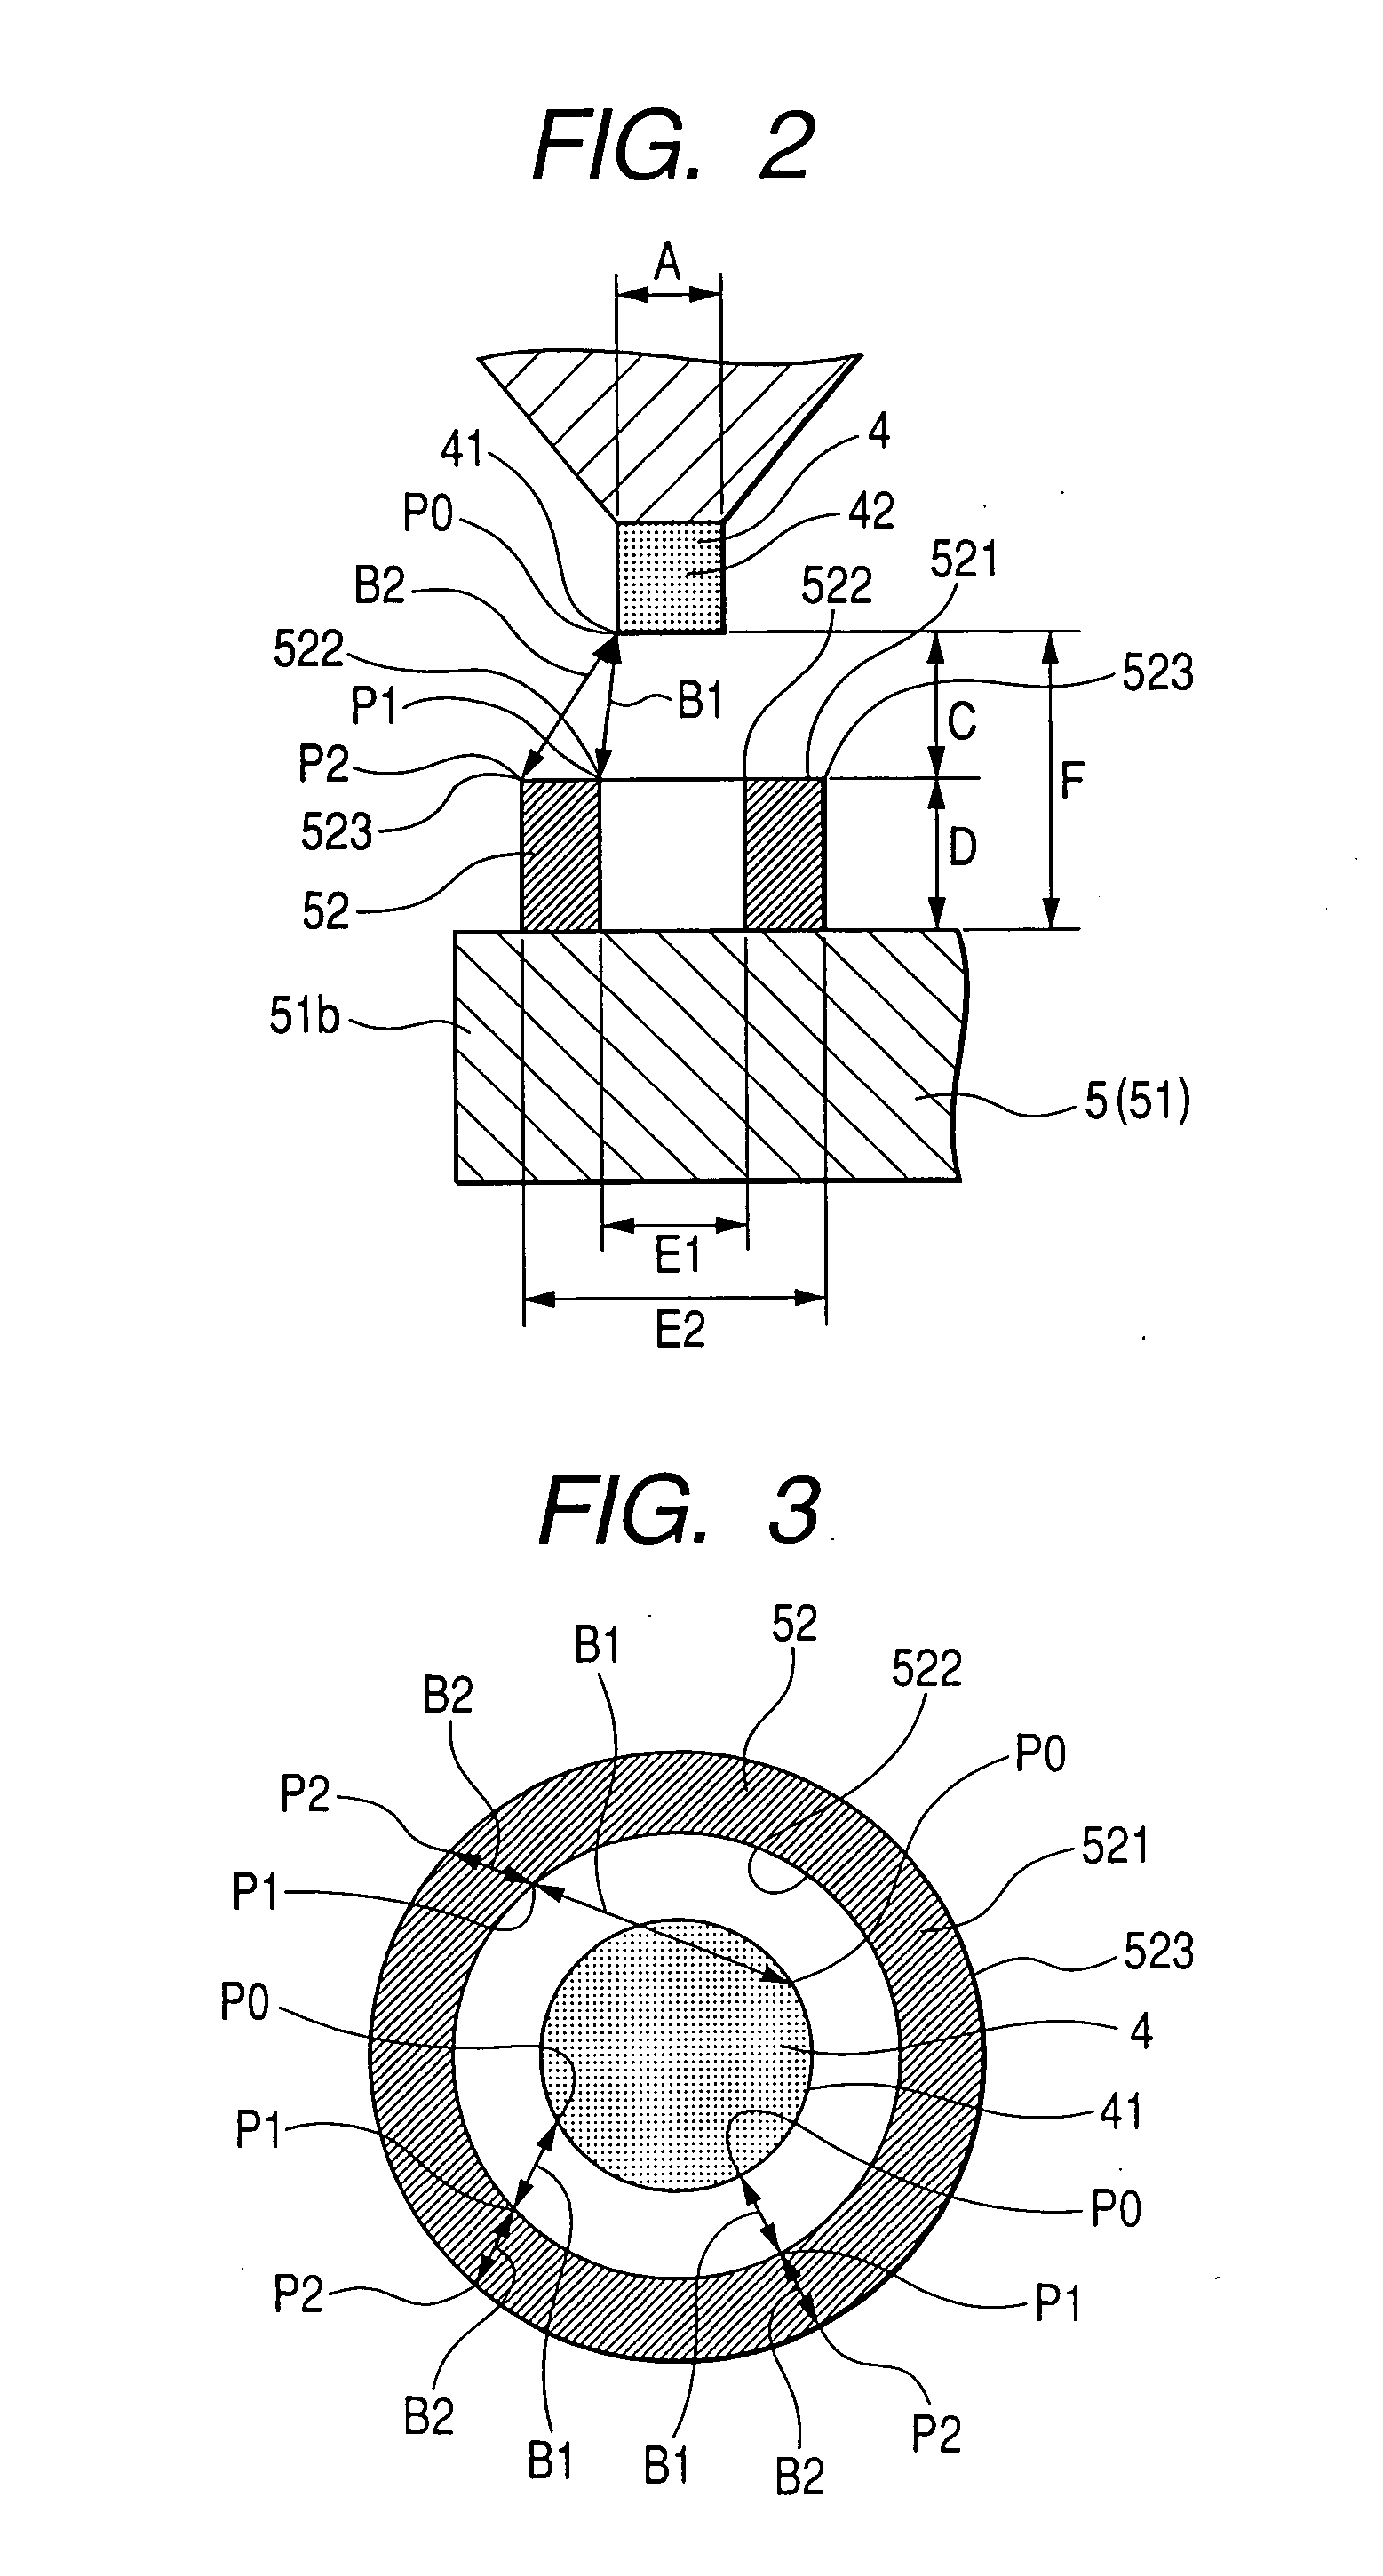 Spark plug having ground electrode protruding member with inner and outer edges